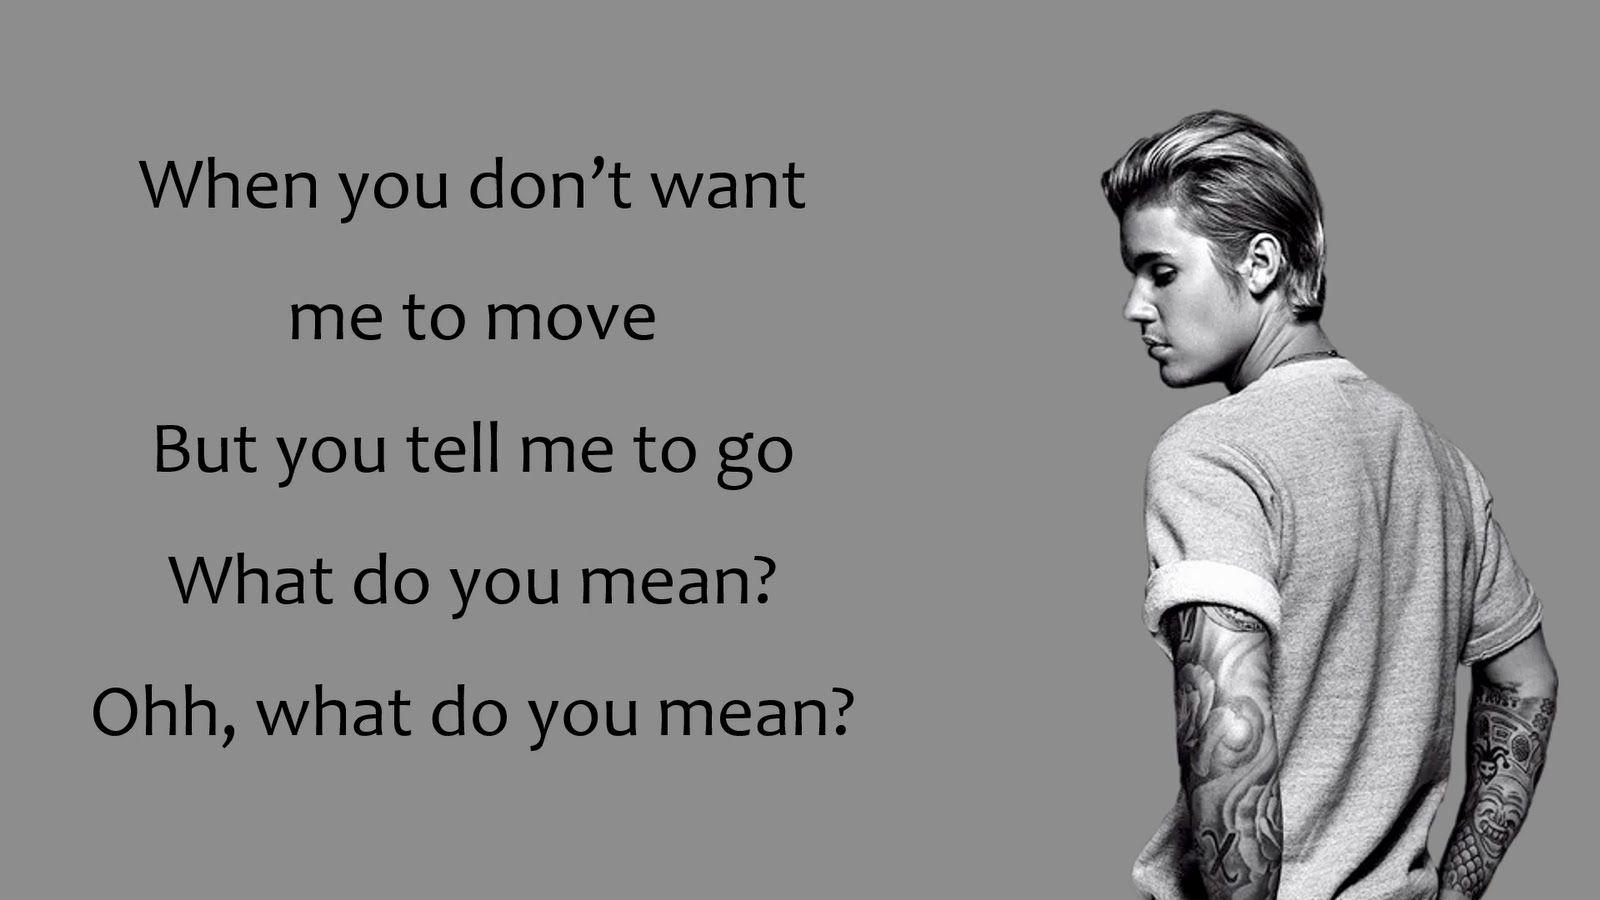 What do you mean. Джастин Бибер 2015 what do you mean. Бибер what do you mean. Justin Bieber what do you mean обложка. Purpose Джастин Бибер.